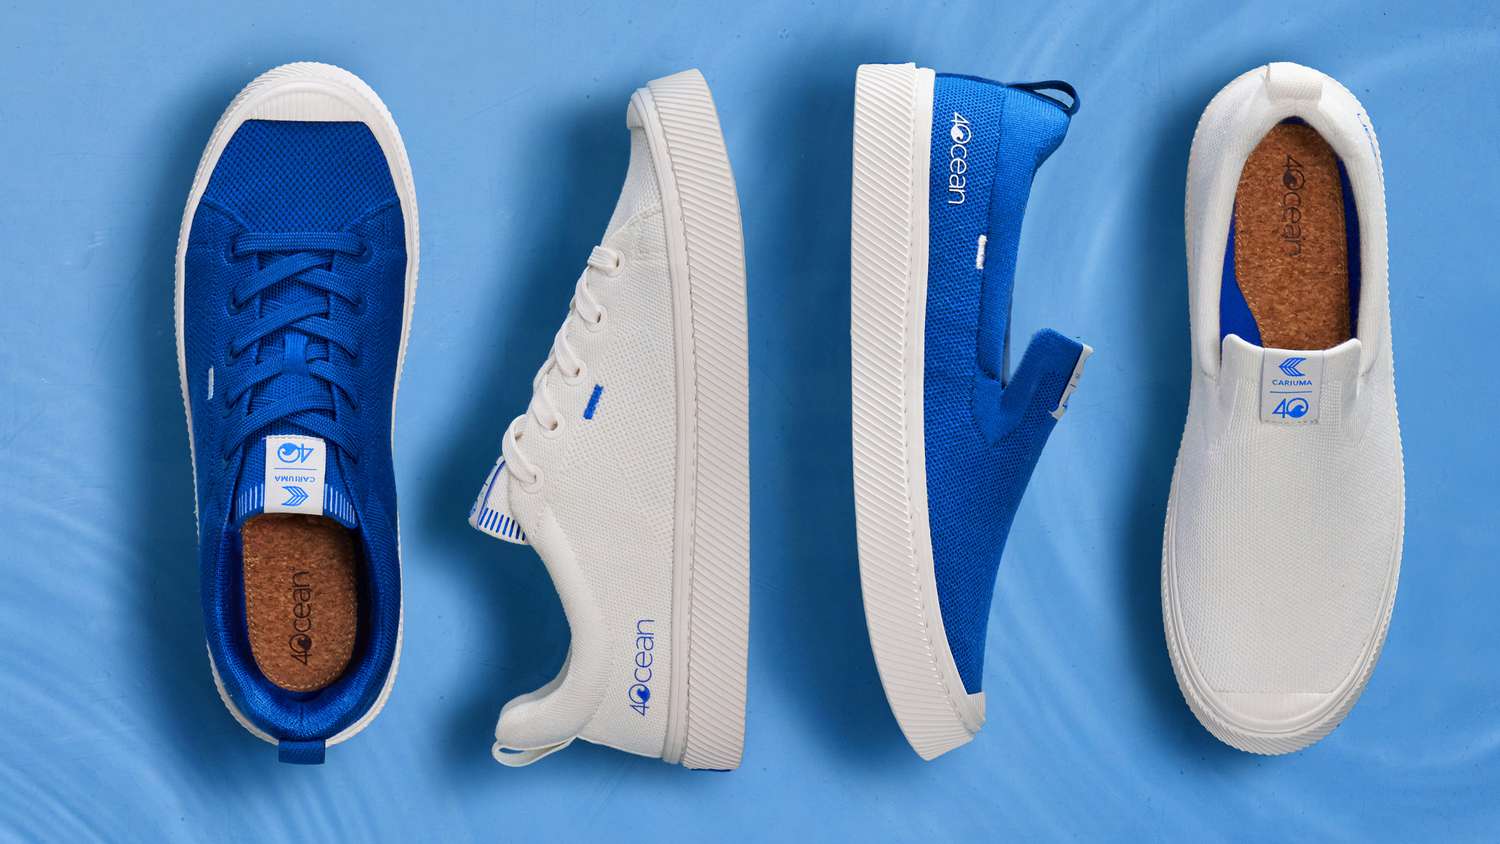 This Wildly Popular Sustainable Sneaker Brand Has Two New Limited-Edition Colors